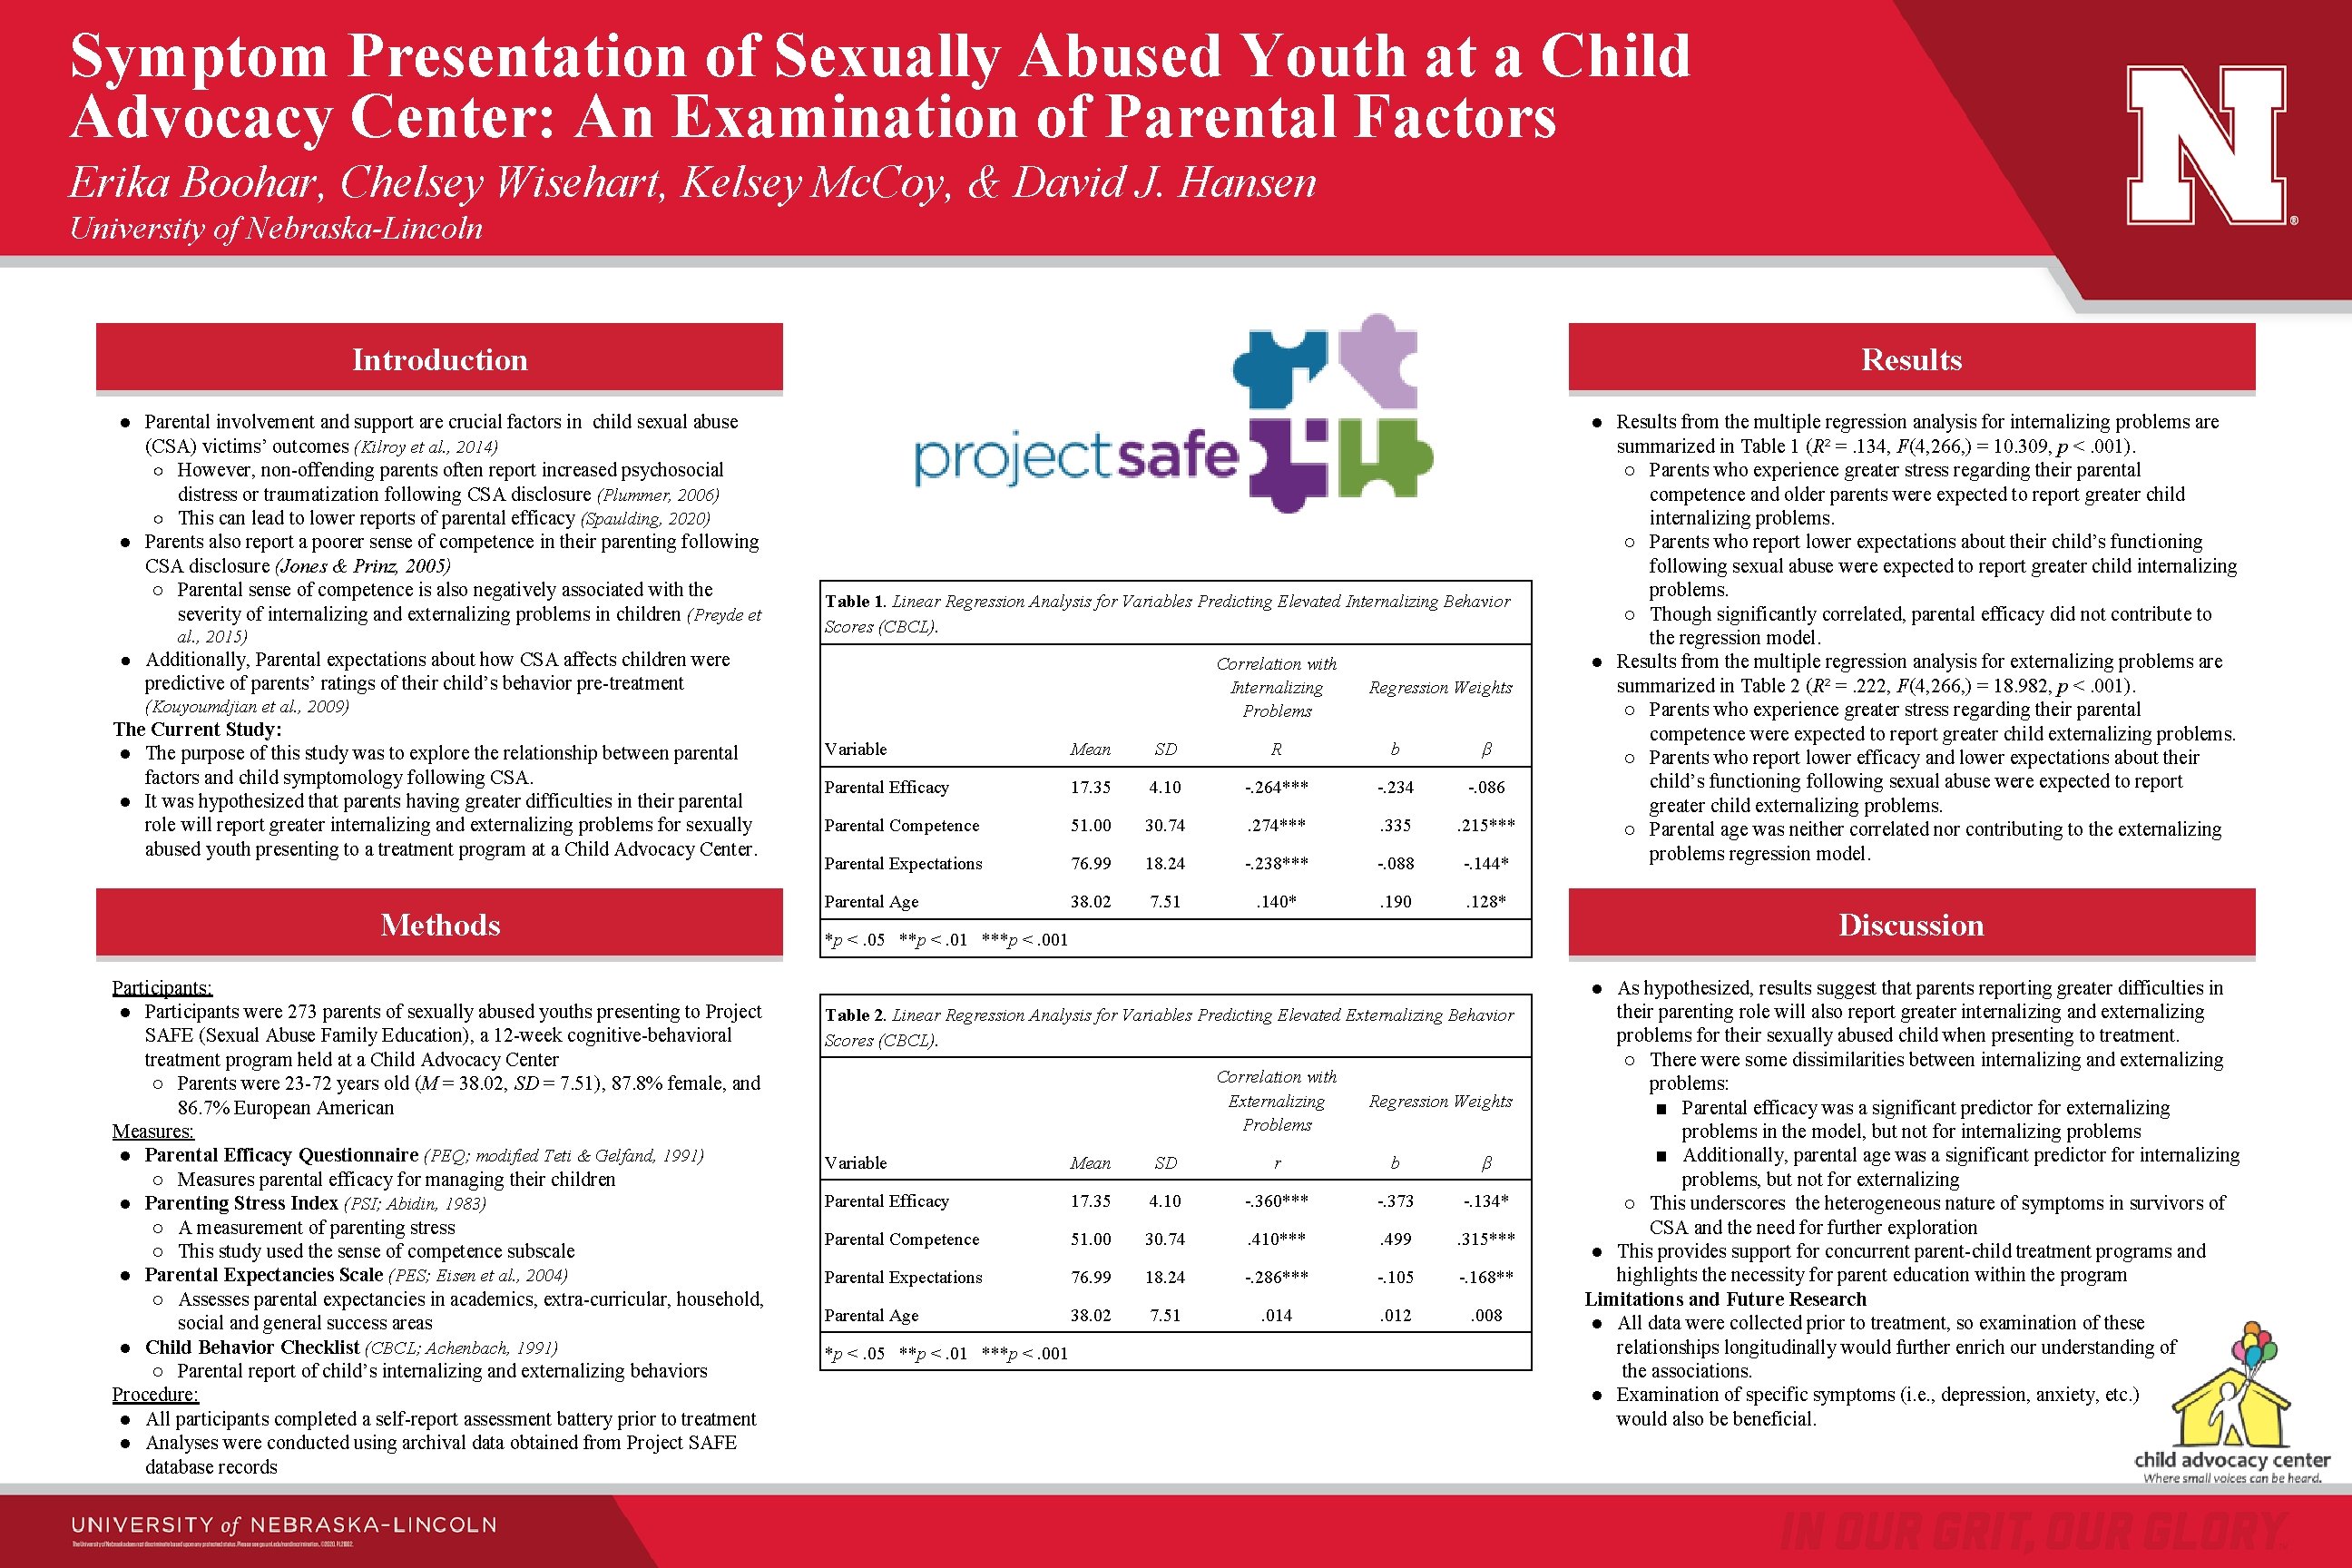 Symptom Presentation of Sexually Abused Youth at a Child Advocacy Center: An Examination of